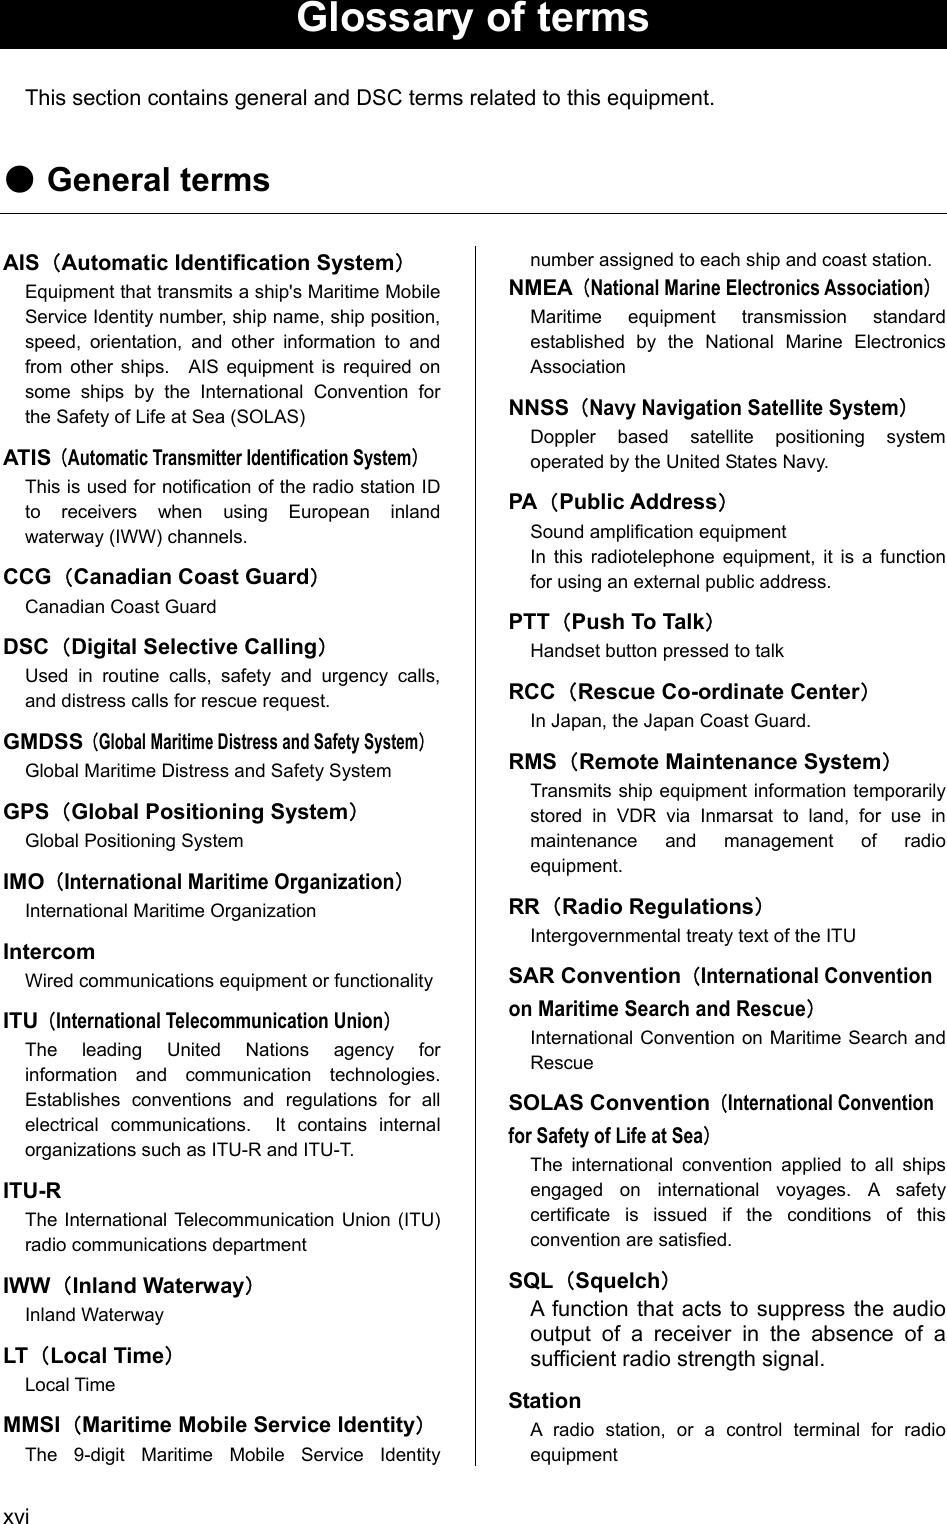  xvi  Glossary of terms  This section contains general and DSC terms related to this equipment.  ● General terms  AIS（Automatic Identification System） Equipment that transmits a ship&apos;s Maritime Mobile Service Identity number, ship name, ship position, speed, orientation, and other information to and from other ships.  AIS equipment is required on some ships by the International Convention for the Safety of Life at Sea (SOLAS) ATIS（Automatic Transmitter Identification System） This is used for notification of the radio station ID to receivers when using European inland waterway (IWW) channels. CCG（Canadian Coast Guard） Canadian Coast Guard DSC（Digital Selective Calling） Used in routine calls, safety and urgency calls, and distress calls for rescue request. GMDSS（Global Maritime Distress and Safety System） Global Maritime Distress and Safety System GPS（Global Positioning System） Global Positioning System IMO（International Maritime Organization） International Maritime Organization Intercom Wired communications equipment or functionality ITU（International Telecommunication Union） The leading United Nations agency for information and communication technologies.  Establishes conventions and regulations for all electrical communications.  It contains internal organizations such as ITU-R and ITU-T. ITU-R The International Telecommunication Union (ITU) radio communications department IWW（Inland Waterway） Inland Waterway LT（Local Time） Local Time MMSI（Maritime Mobile Service Identity） The 9-digit Maritime Mobile Service Identity number assigned to each ship and coast station. NMEA（National Marine Electronics Association） Maritime equipment transmission standard established by the National Marine Electronics Association NNSS（Navy Navigation Satellite System） Doppler based satellite positioning system operated by the United States Navy. PA（Public Address） Sound amplification equipment In this radiotelephone equipment, it is a function for using an external public address. PTT（Push To Talk） Handset button pressed to talk RCC（Rescue Co-ordinate Center） In Japan, the Japan Coast Guard. RMS（Remote Maintenance System） Transmits ship equipment information temporarily stored in VDR via Inmarsat to land, for use in maintenance and management of radio equipment. RR（Radio Regulations） Intergovernmental treaty text of the ITU SAR Convention（International Convention on Maritime Search and Rescue） International Convention on Maritime Search and Rescue SOLAS Convention（International Convention for Safety of Life at Sea） The international convention applied to all ships engaged on international voyages. A safety certificate is issued if the conditions of this convention are satisfied. SQL（Squelch） A function that acts to suppress the audio output of a receiver in the absence of a sufficient radio strength signal. Station A radio station, or a control terminal for radio equipment 